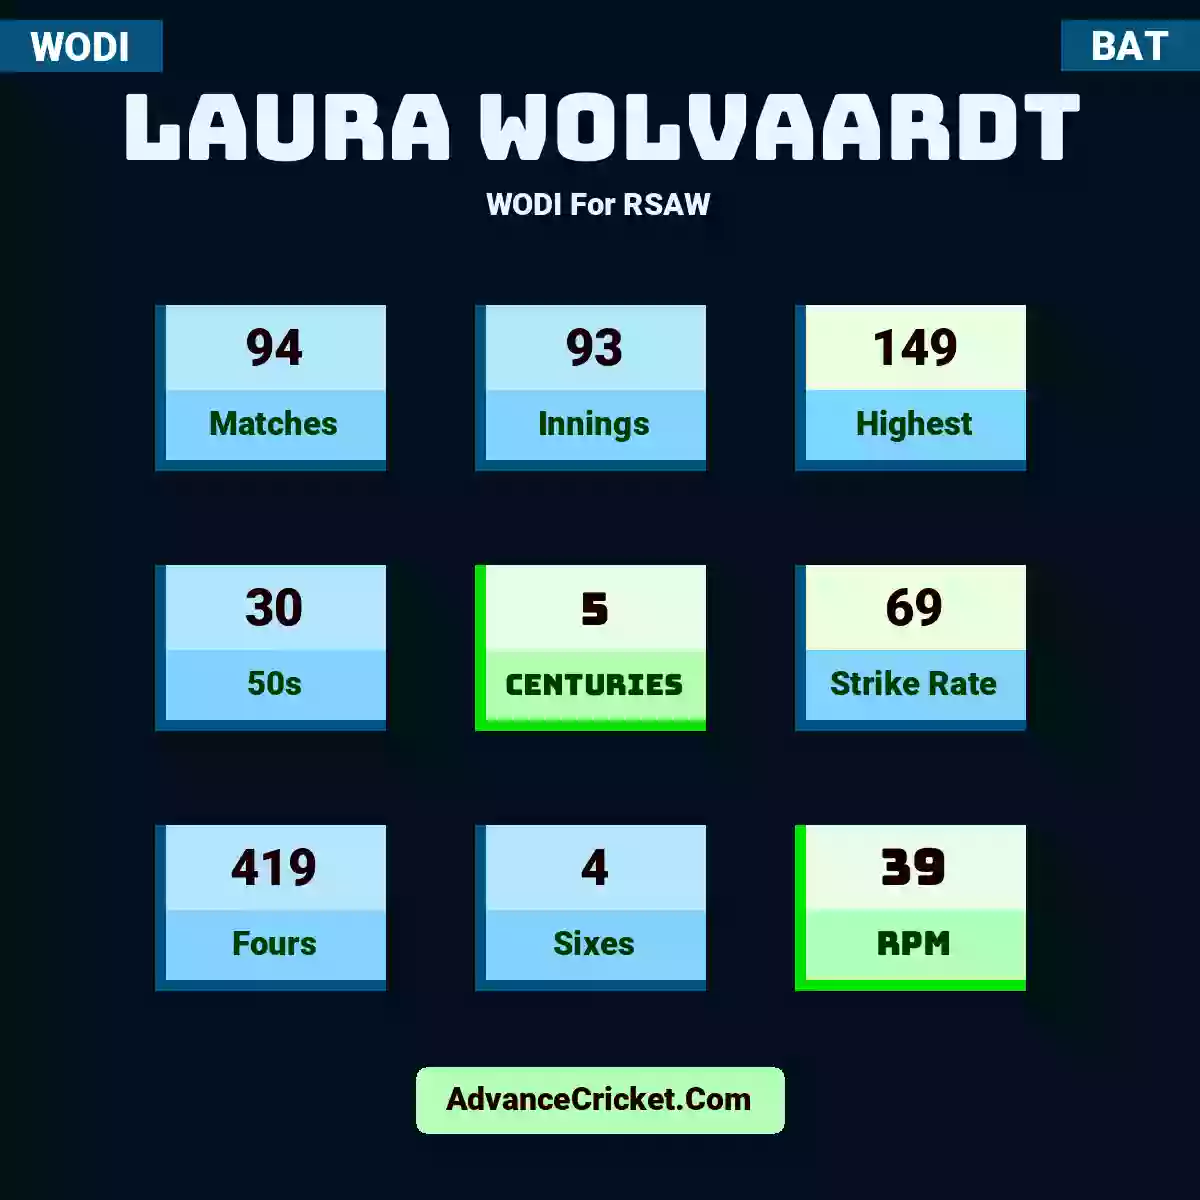 Laura Wolvaardt WODI  For RSAW, Laura Wolvaardt played 94 matches, scored 149 runs as highest, 30 half-centuries, and 5 centuries, with a strike rate of 69. L.Wolvaardt hit 419 fours and 4 sixes, with an RPM of 39.